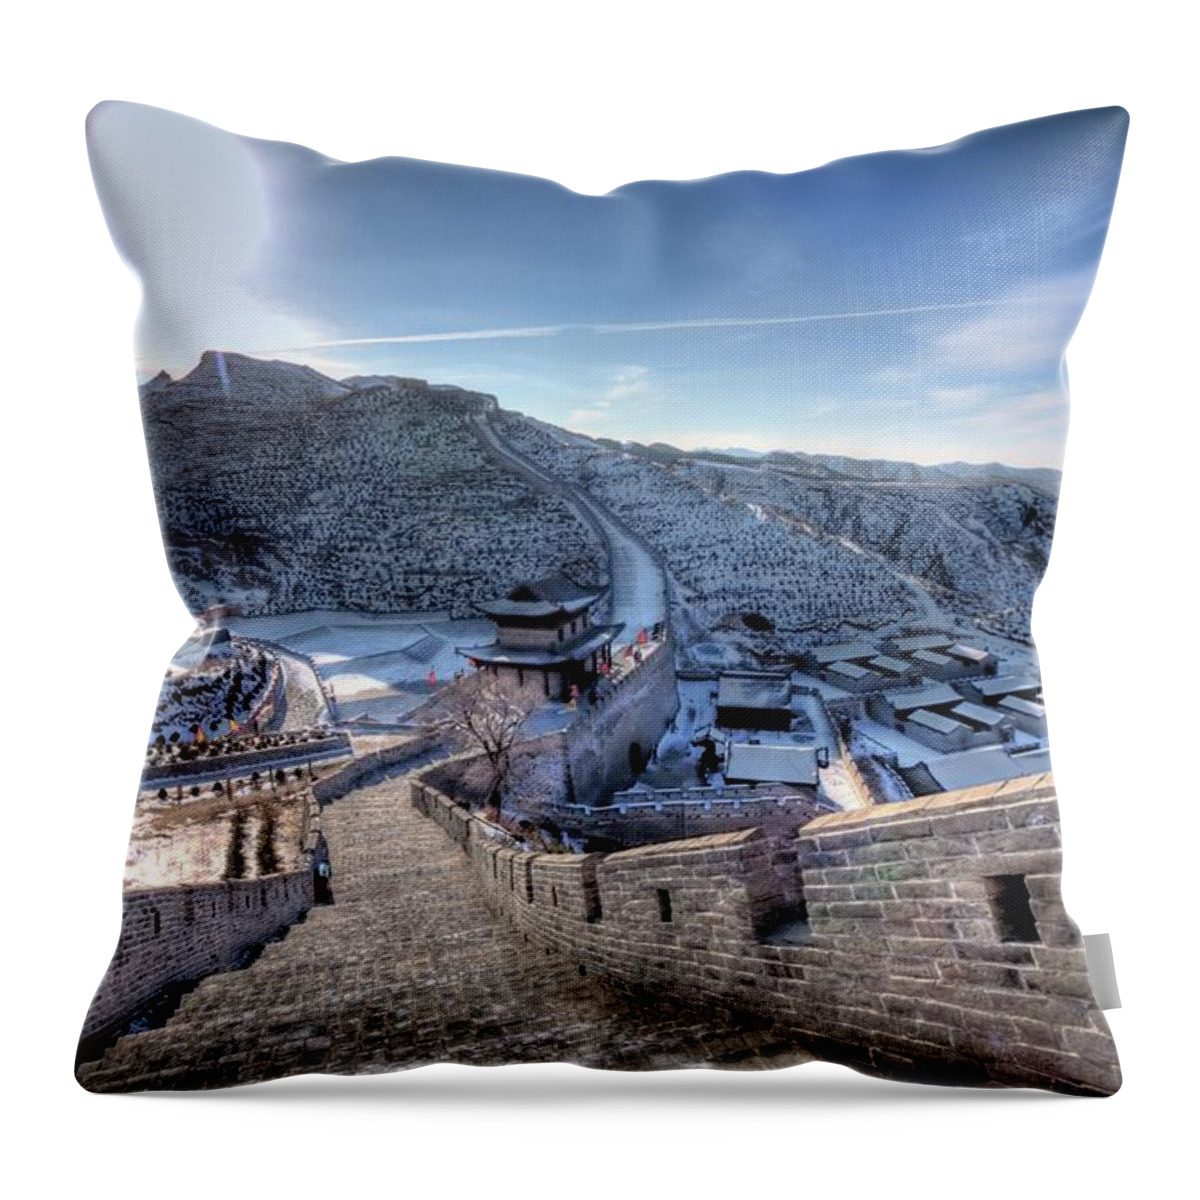 Chinese Culture Throw Pillow featuring the photograph View Of Great Wall by Photograph By Sunny Ip.